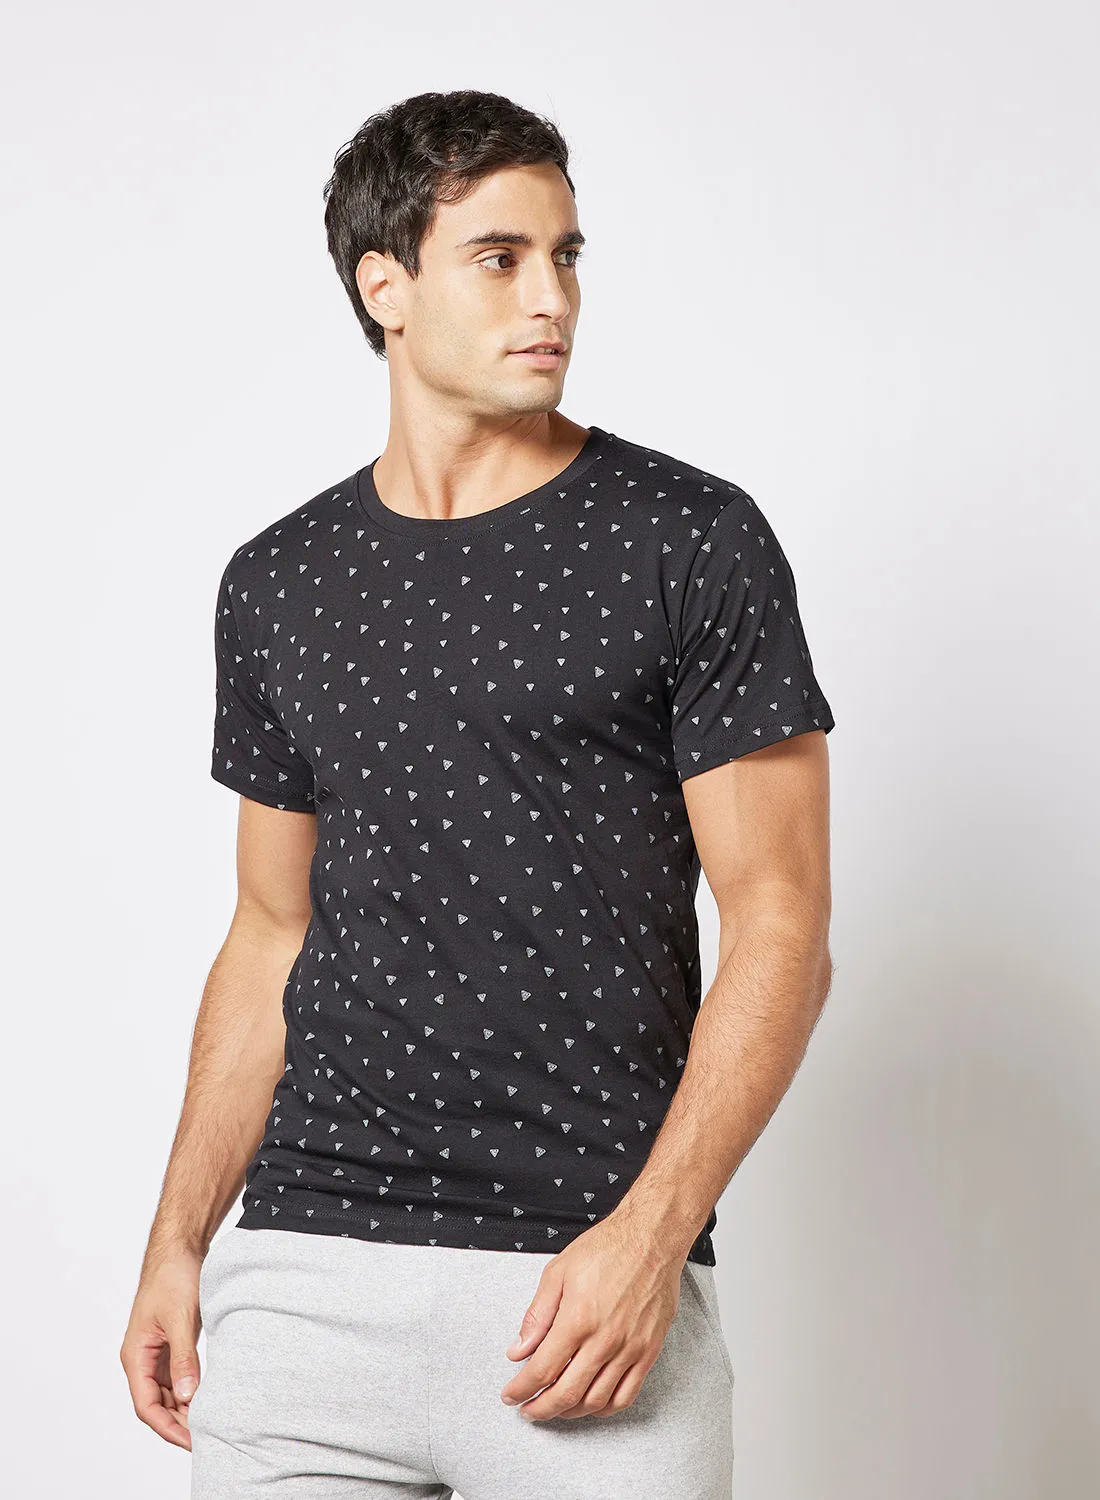 QUWA Casual All Over Printed Cotton Slim Fit Short Sleeves Crew Neck T-shirt Black